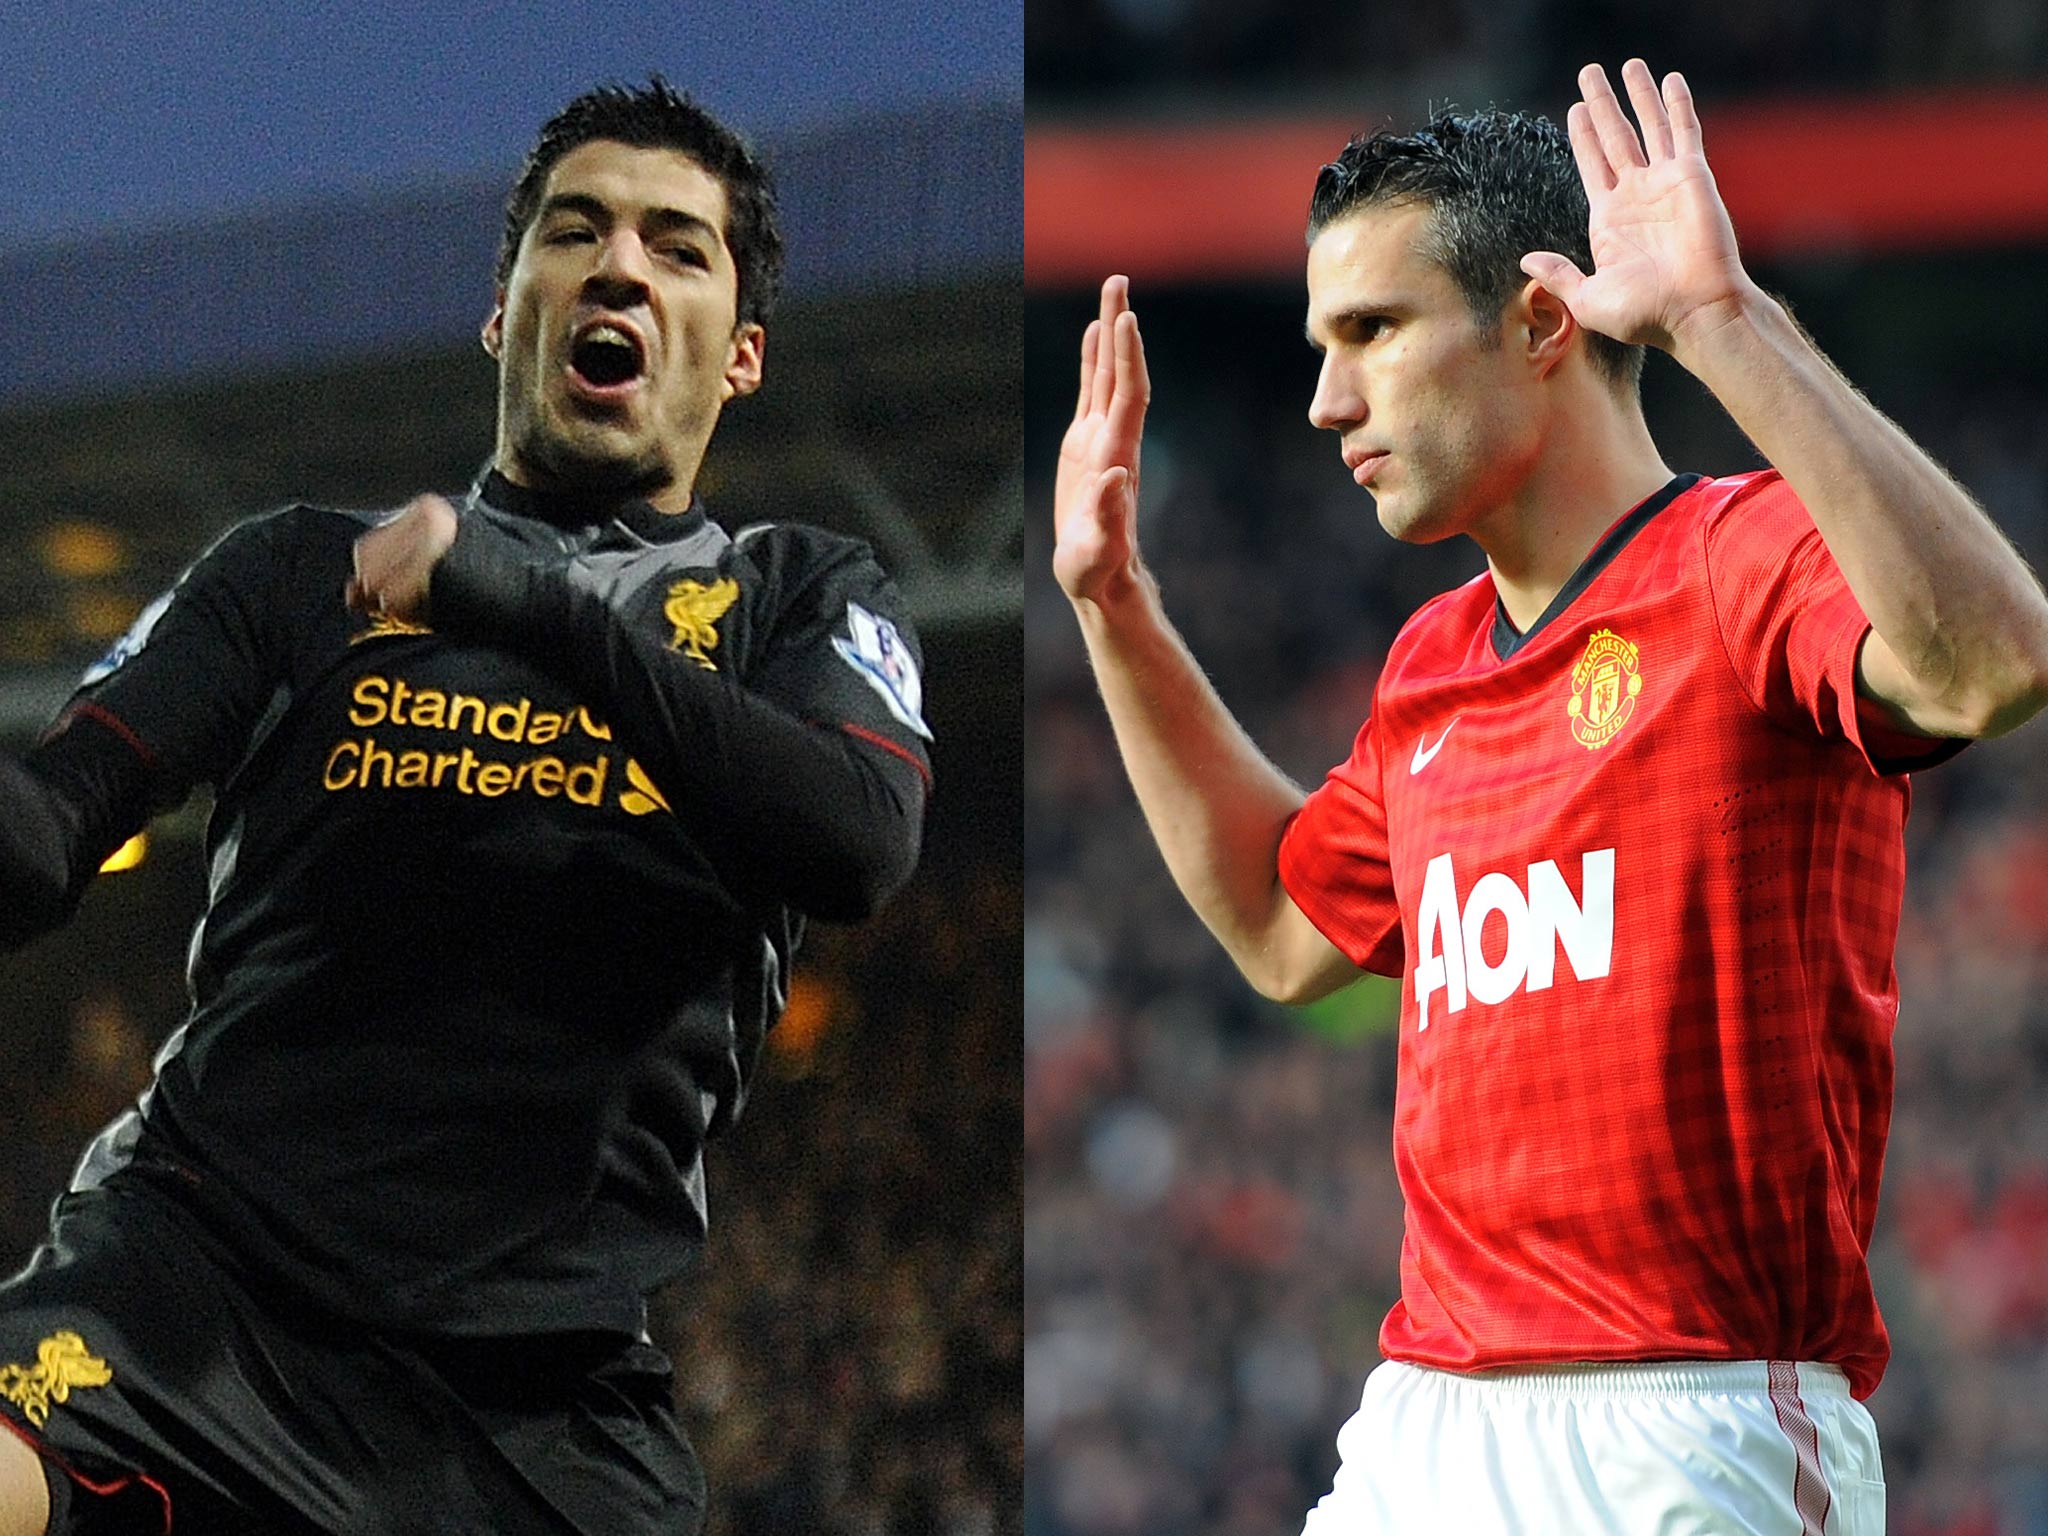 Vital Statistics Age: Robin Van Persie – 29 Luis Suarez – 25 Height: Van Persie – 1.83m Suarez – 1.81m Weight: Van Persie – 71kg Suarez – 81kg International caps: Van Persie – 71 Suarez – 60 International goals: Van Persie – 31 Suarez – 30 Joined club for: Van Persie – £22.5m Suarez – £22.8m Not much separates the two strikers, who both joined their respective clubs for very similar fees, although Suarez’s 30 goals in 60 games for Uruguay is a little better than Van Persie’s 31 in 71 games.